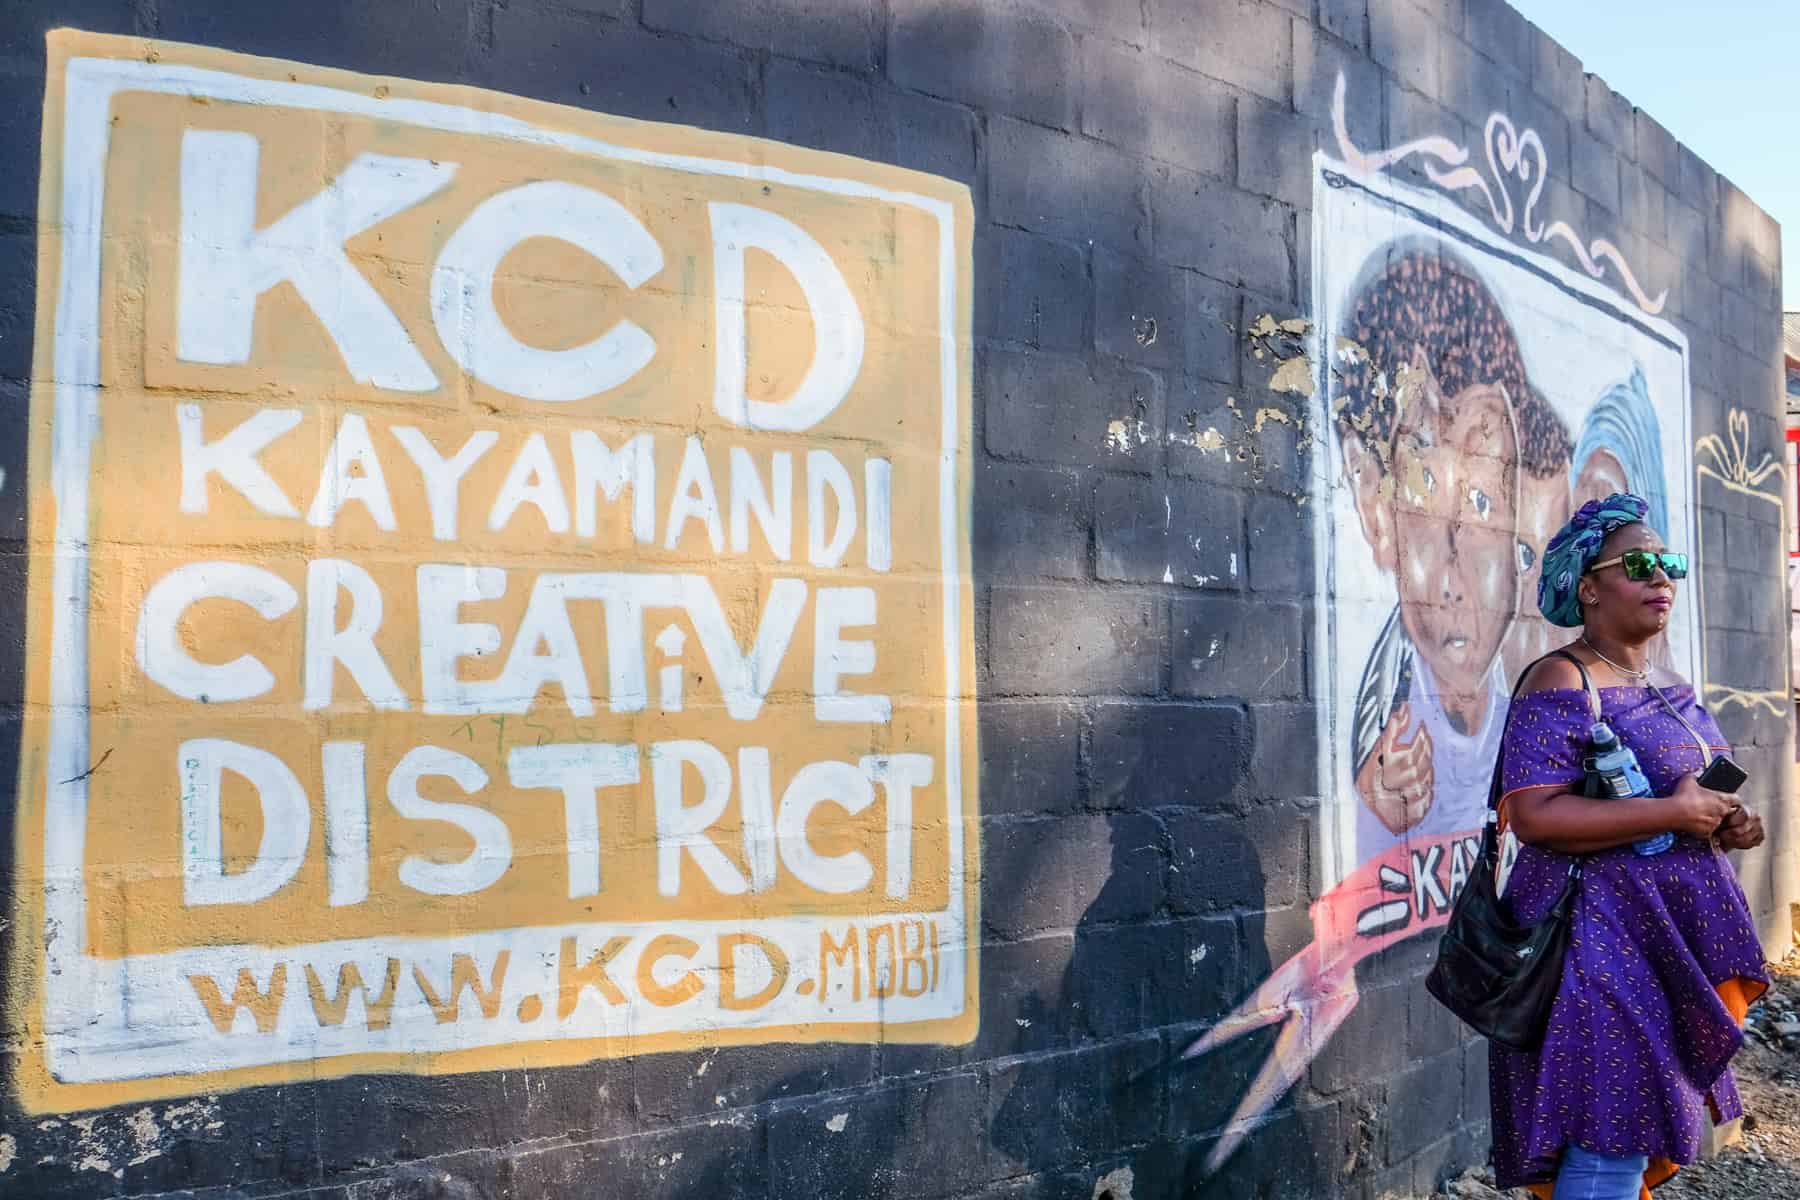 A woman in purple dress, a local guide at the Kayamandi Township in South Africa standing in front of street art as a sign for the KCD Kayamandi Creative District